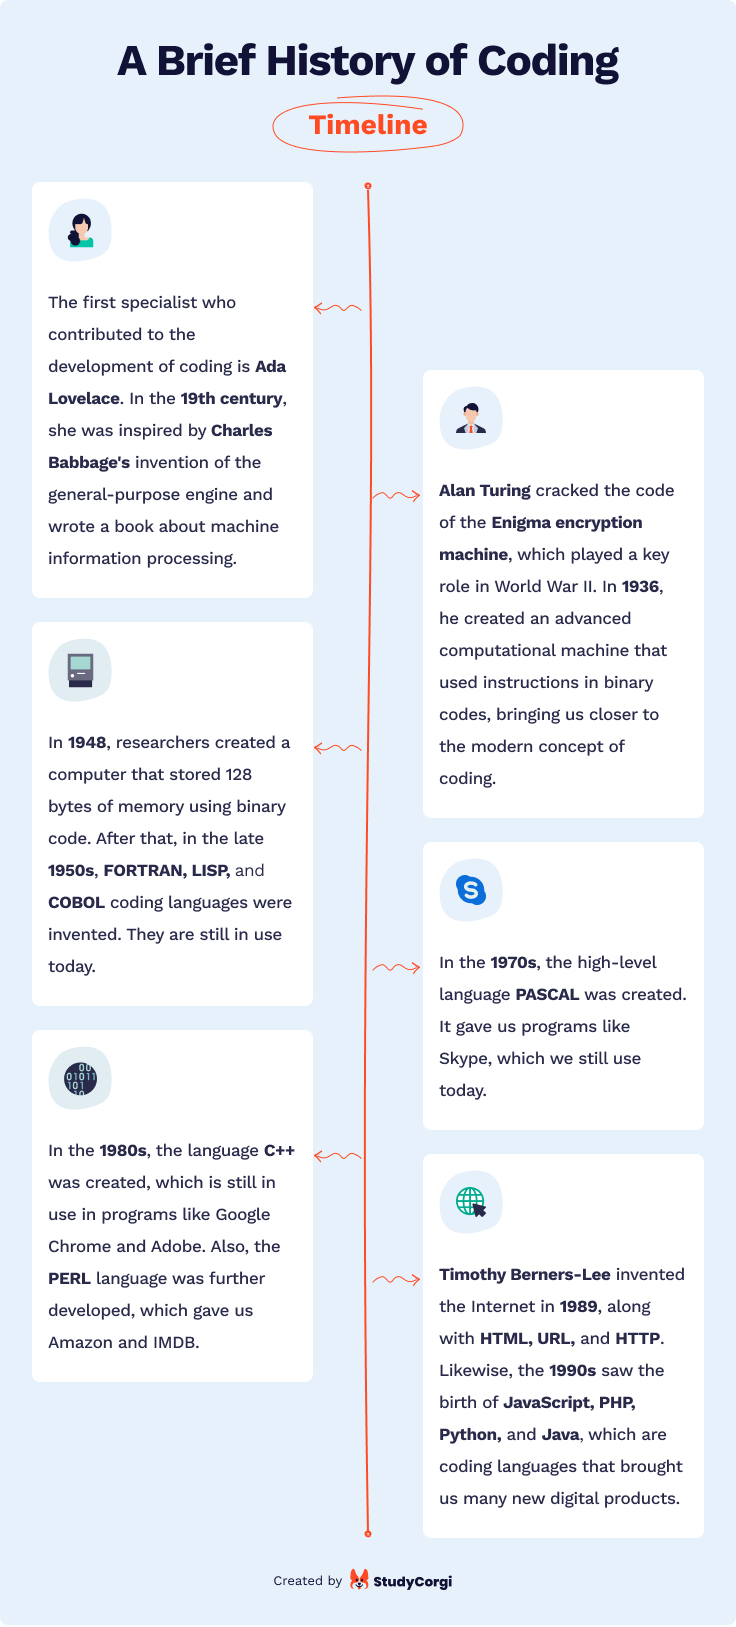 A brief history of coding.